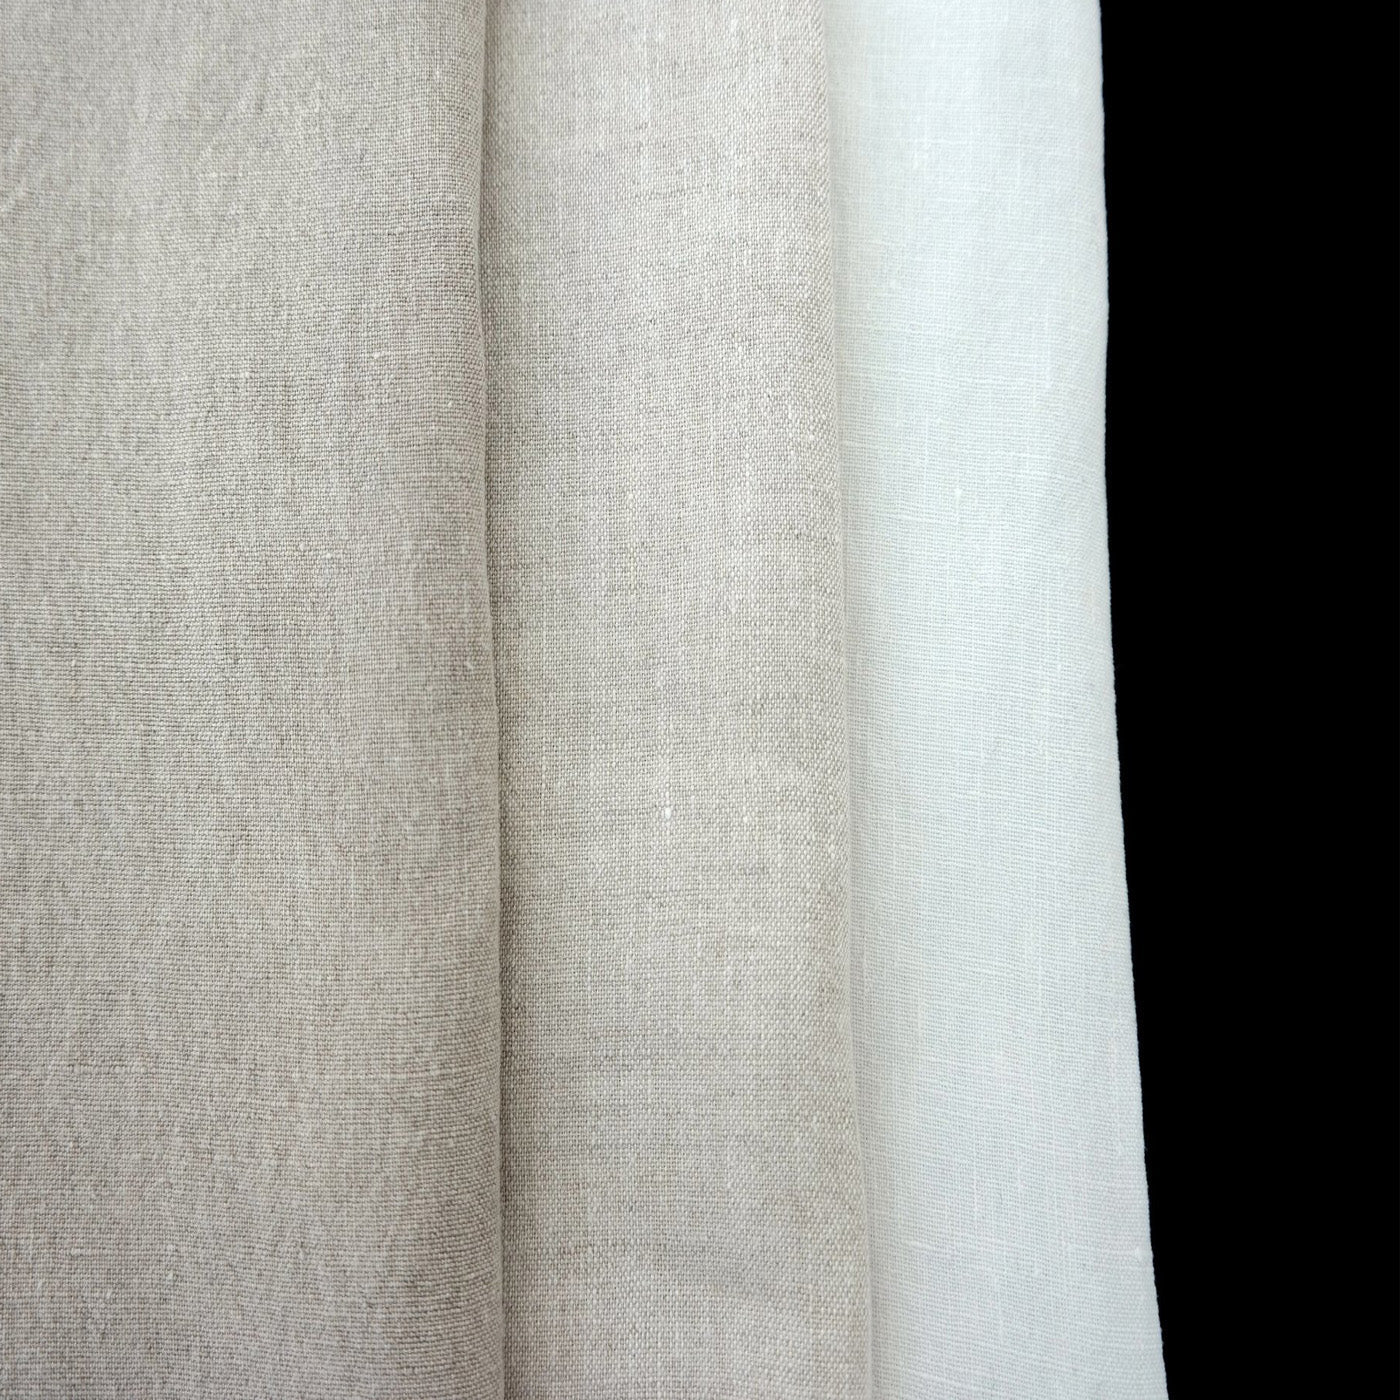 http://linenlab.co.kr/cdn/shop/products/high-twisted-100-linen-fabric-medium-weight-14s-6220-6600-6366-7369-the-linen-lab-ivory-6220-556024.jpg?v=1667847390